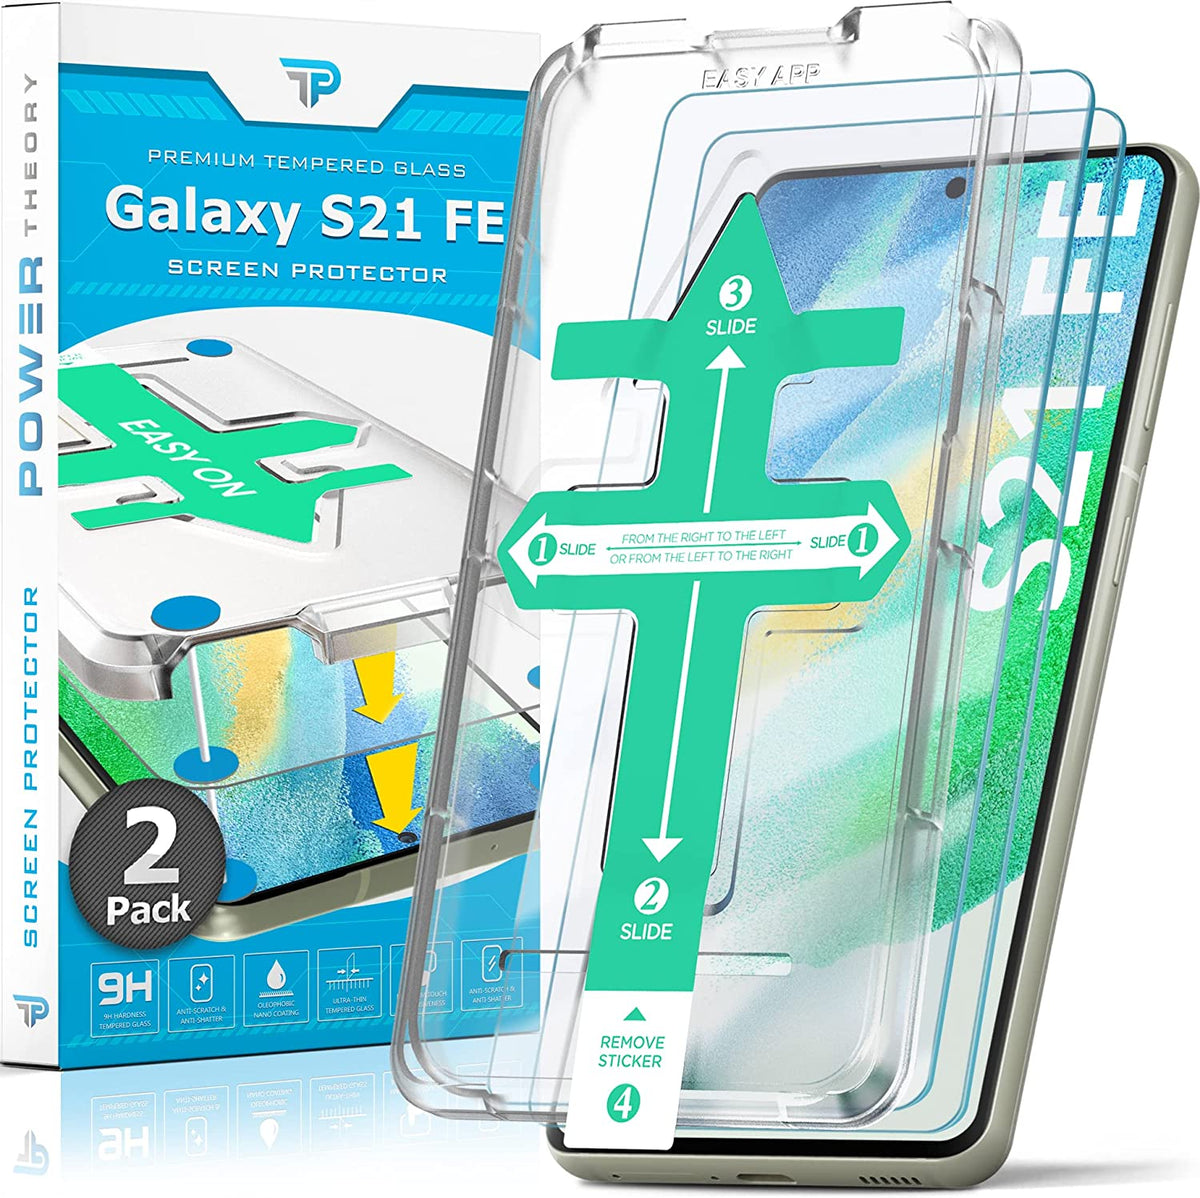 Samsung Galaxy S21 FE 5G Tempered Glass Screen Protector [2-Pack] Cover